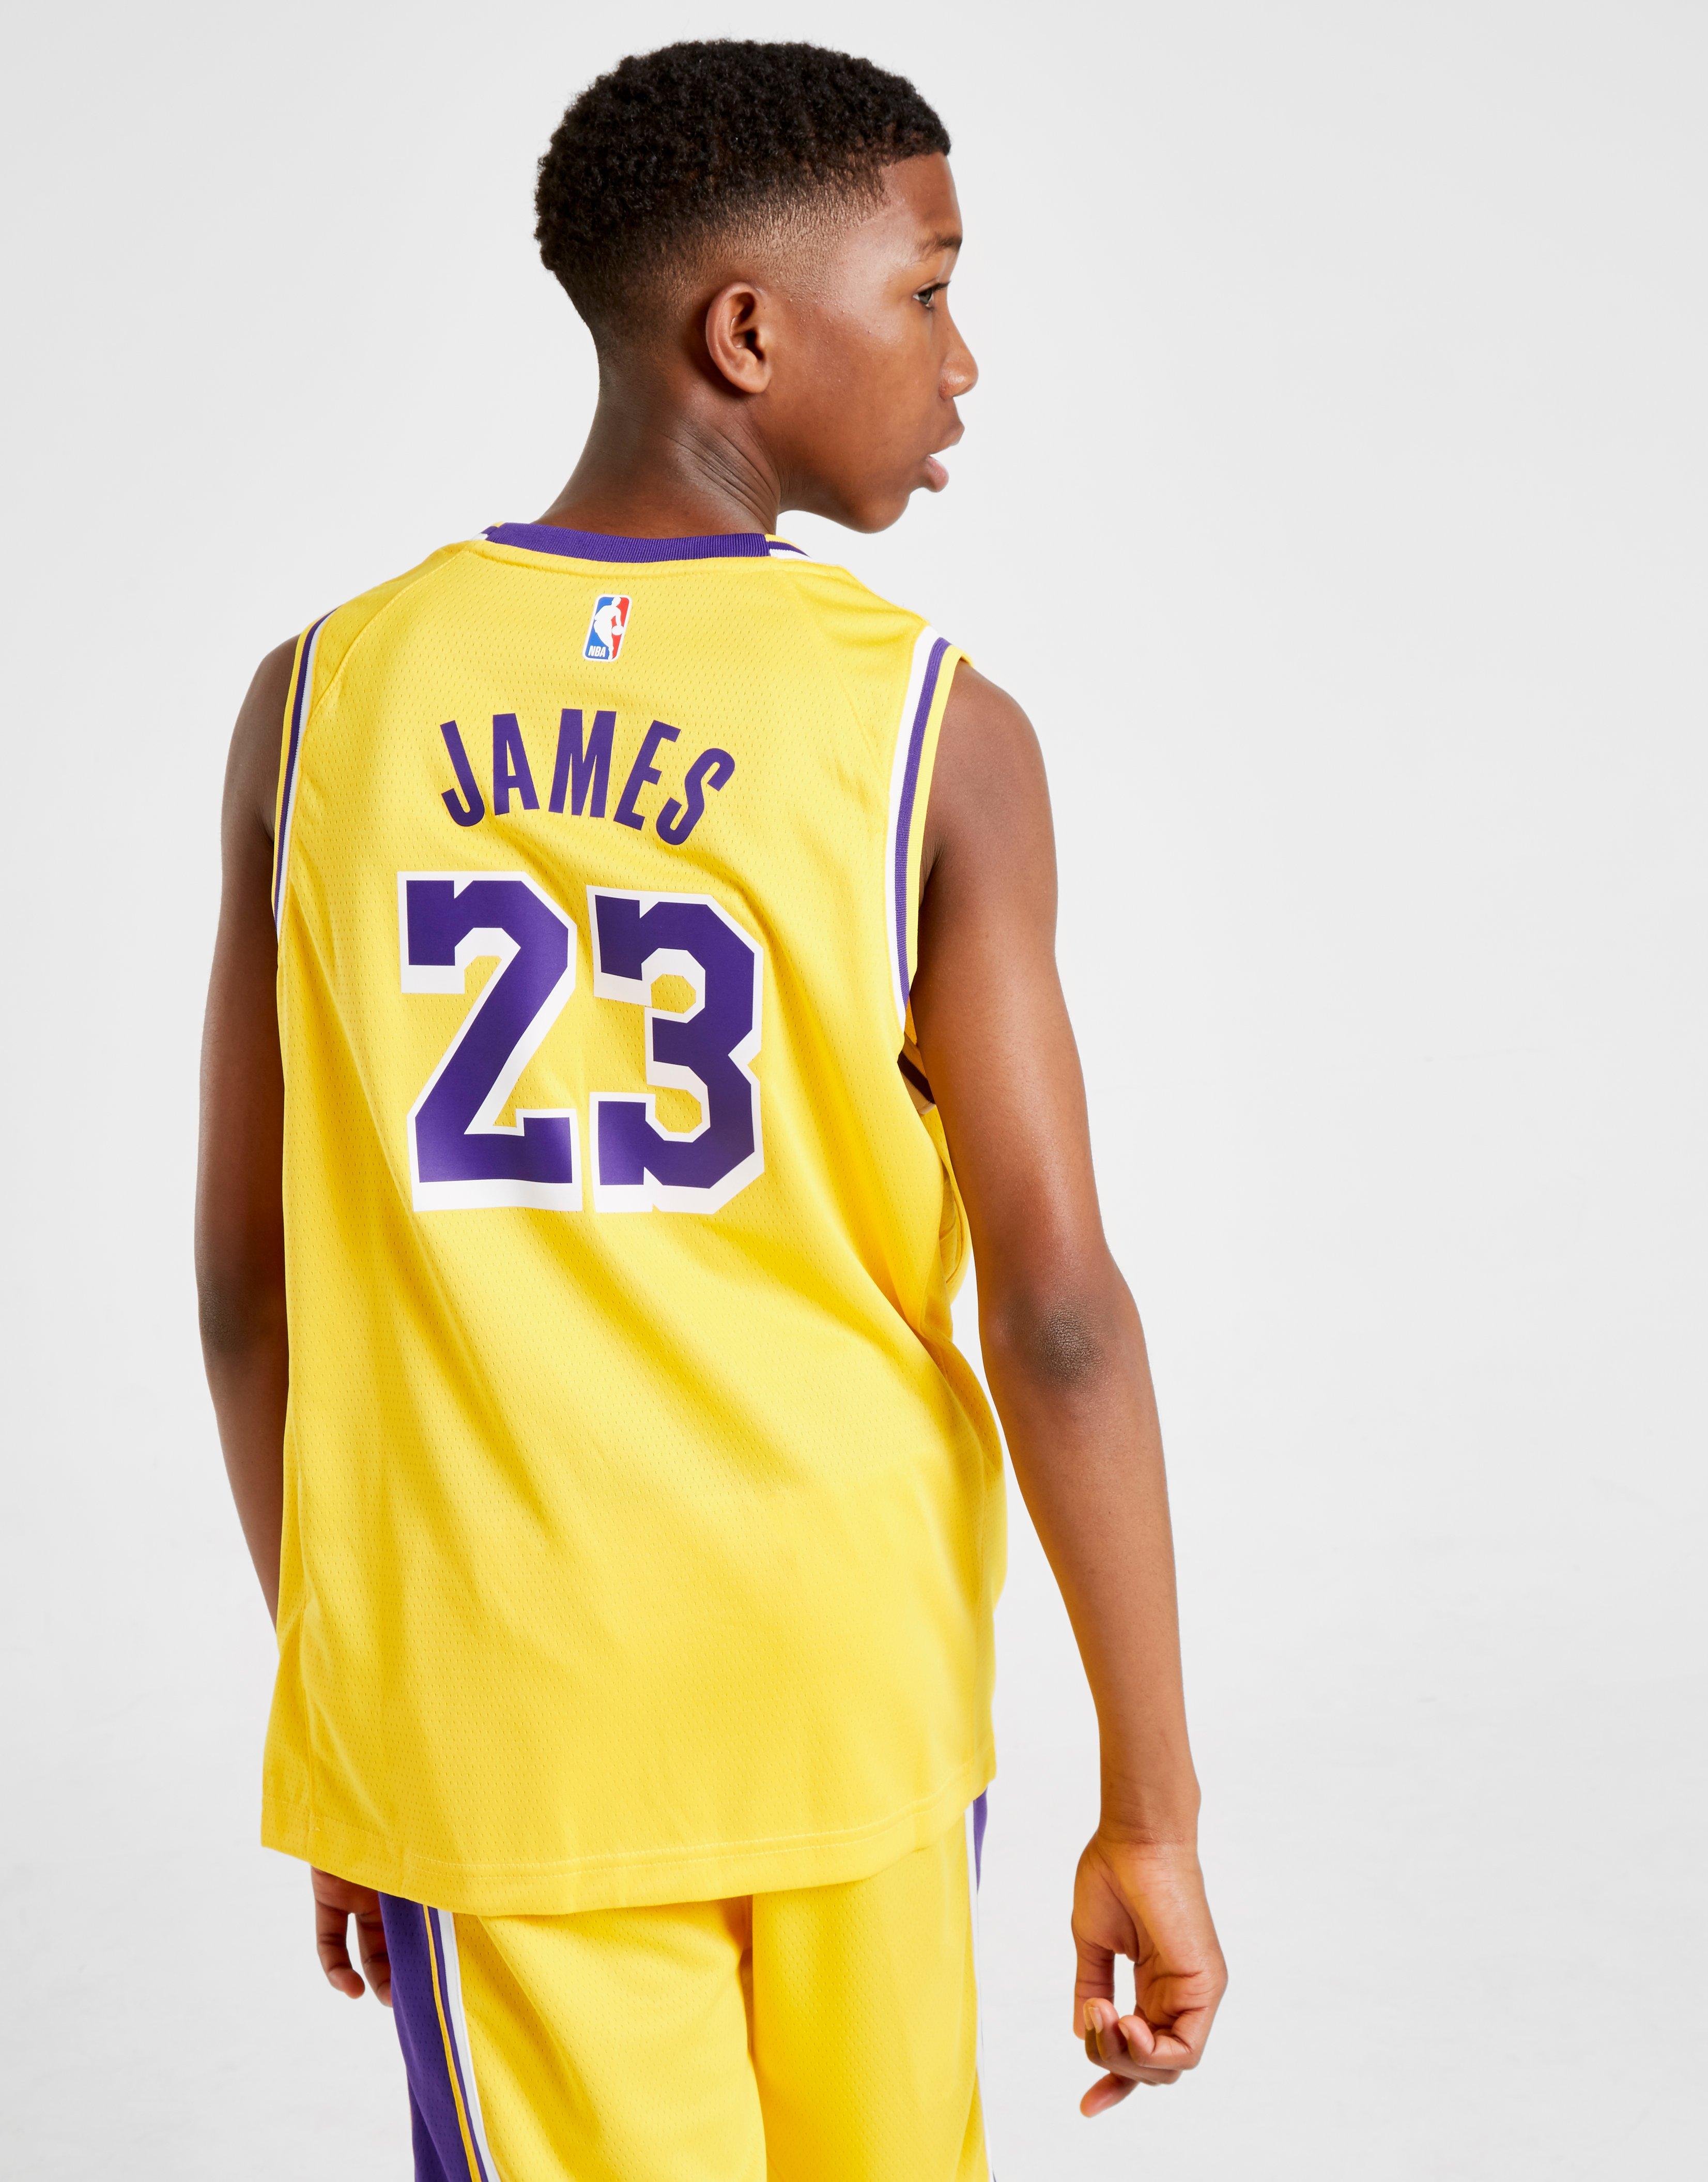 jd lakers jersey